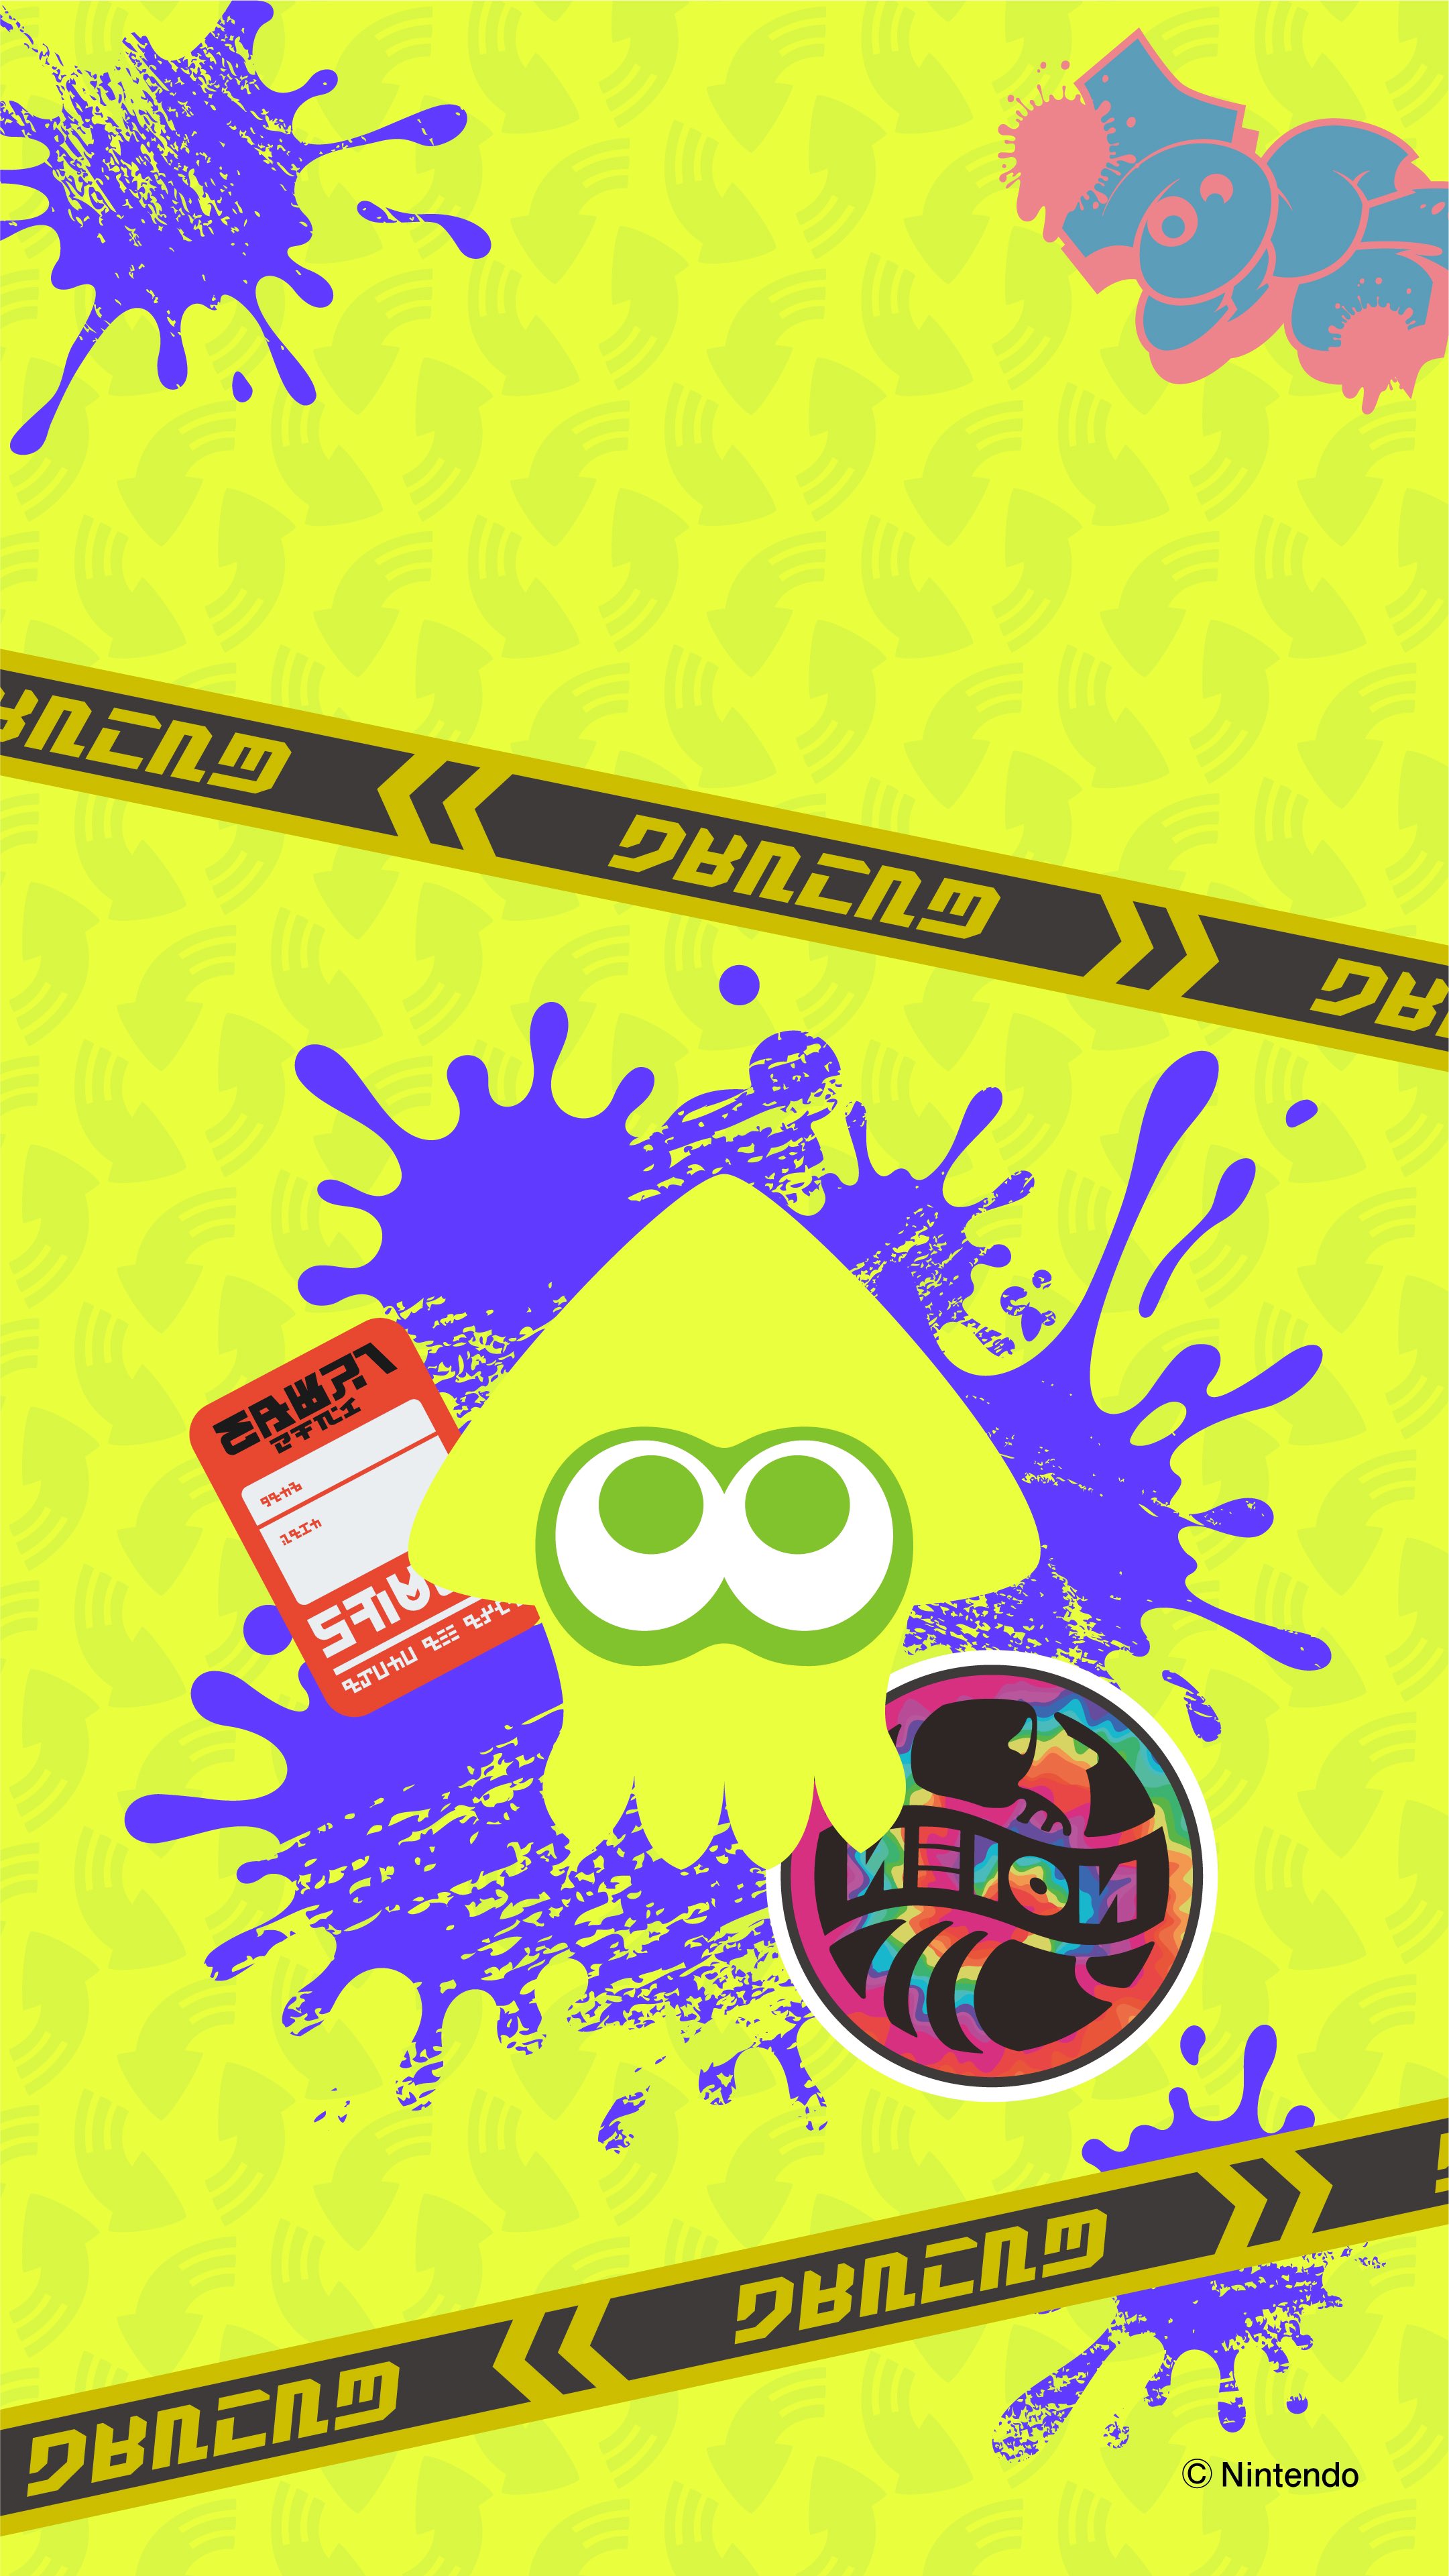 Kyle mclain on a collection of splatoon wallpapers that you can only get by checking in at